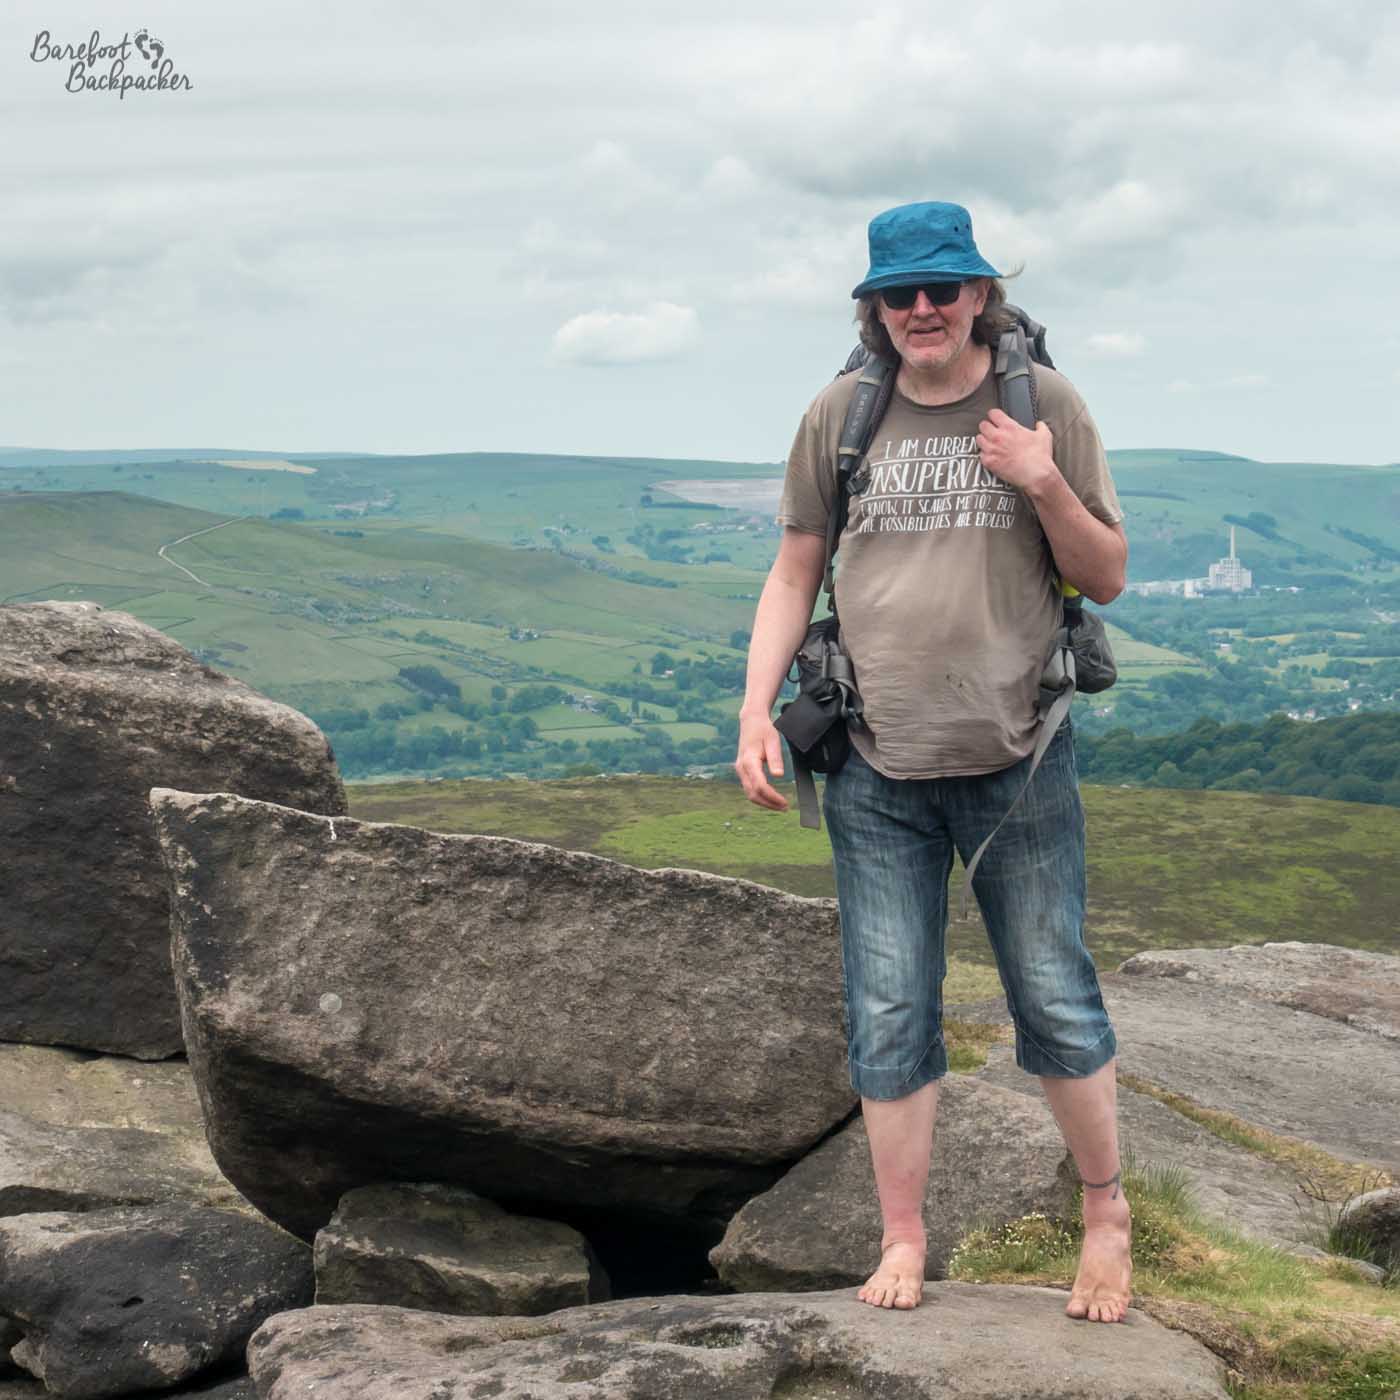 I'm standing on a boulder in the countryside, in front of a long landscape behind with distant hills and bushes. I'm wearing a hat, a t-shirt, knee-length denim shorts, no footwear, and a large backpack.